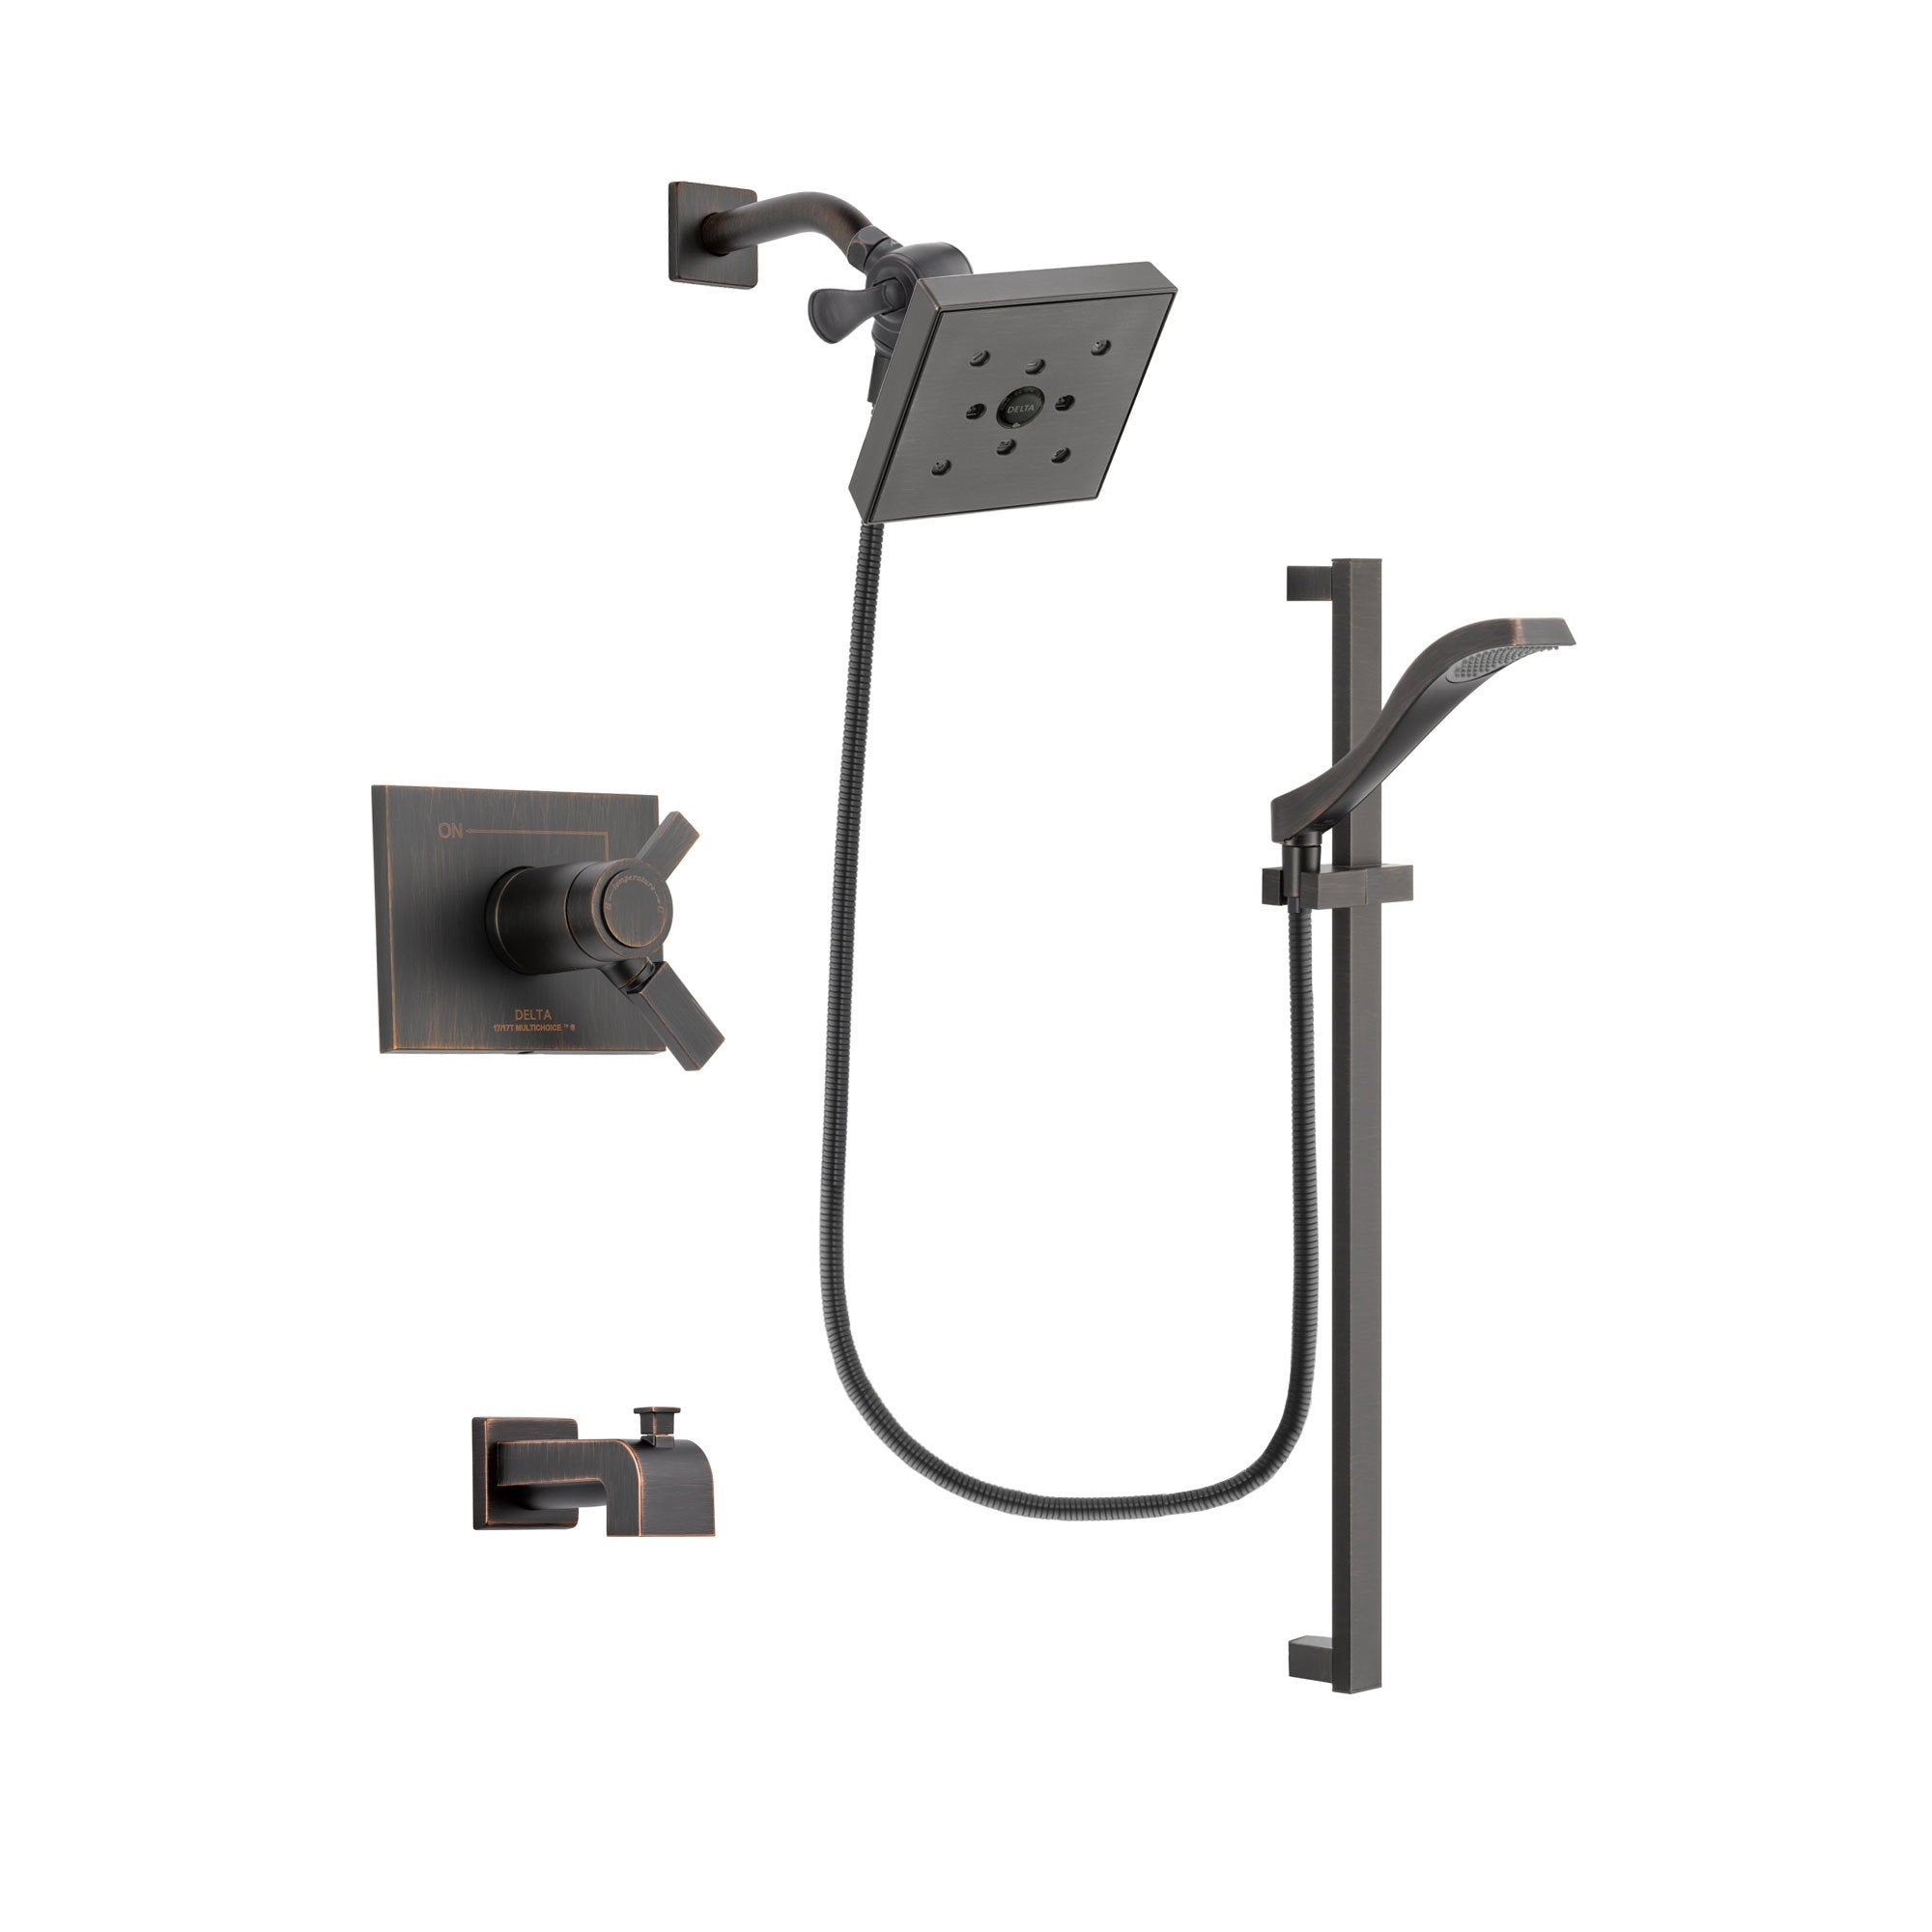 Delta Vero Venetian Bronze Finish Thermostatic Tub and Shower Faucet System Package with Square Shower Head and Modern Handheld Shower Spray with Slide Bar Includes Rough-in Valve and Tub Spout DSP3127V